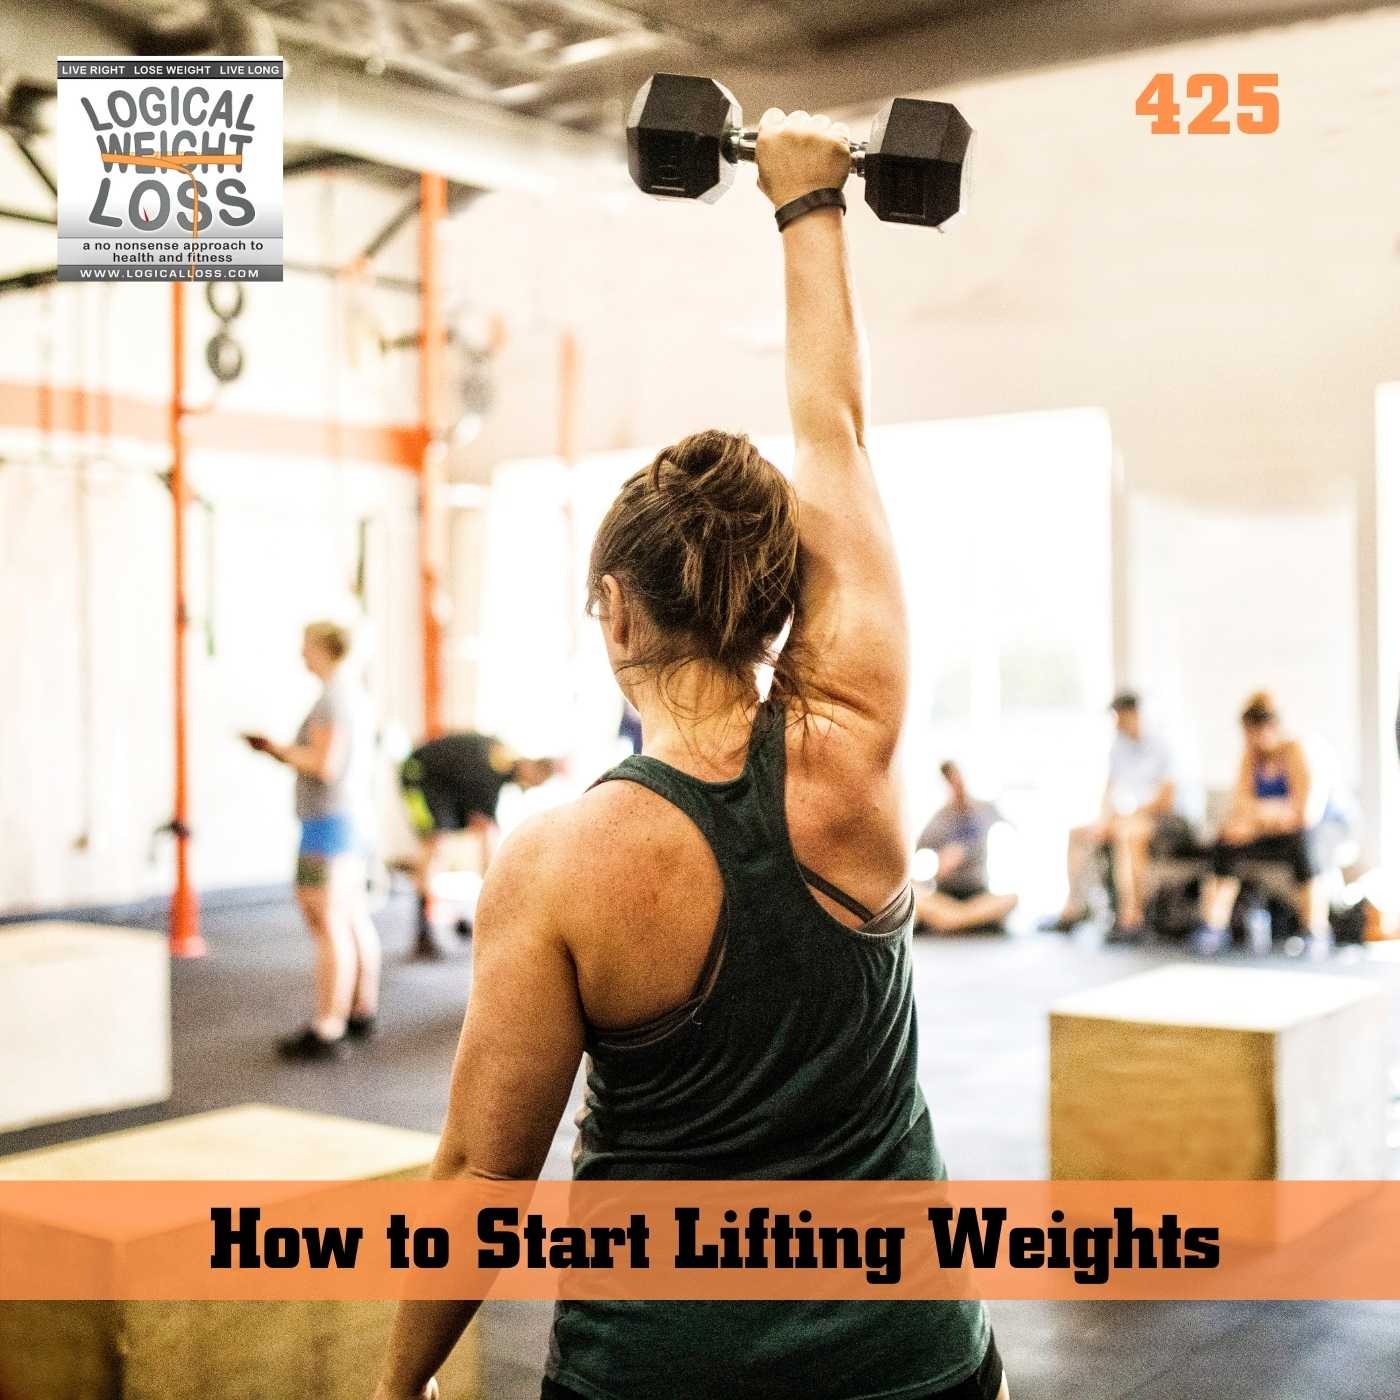 How to Get Started Lifting Weights and Why?